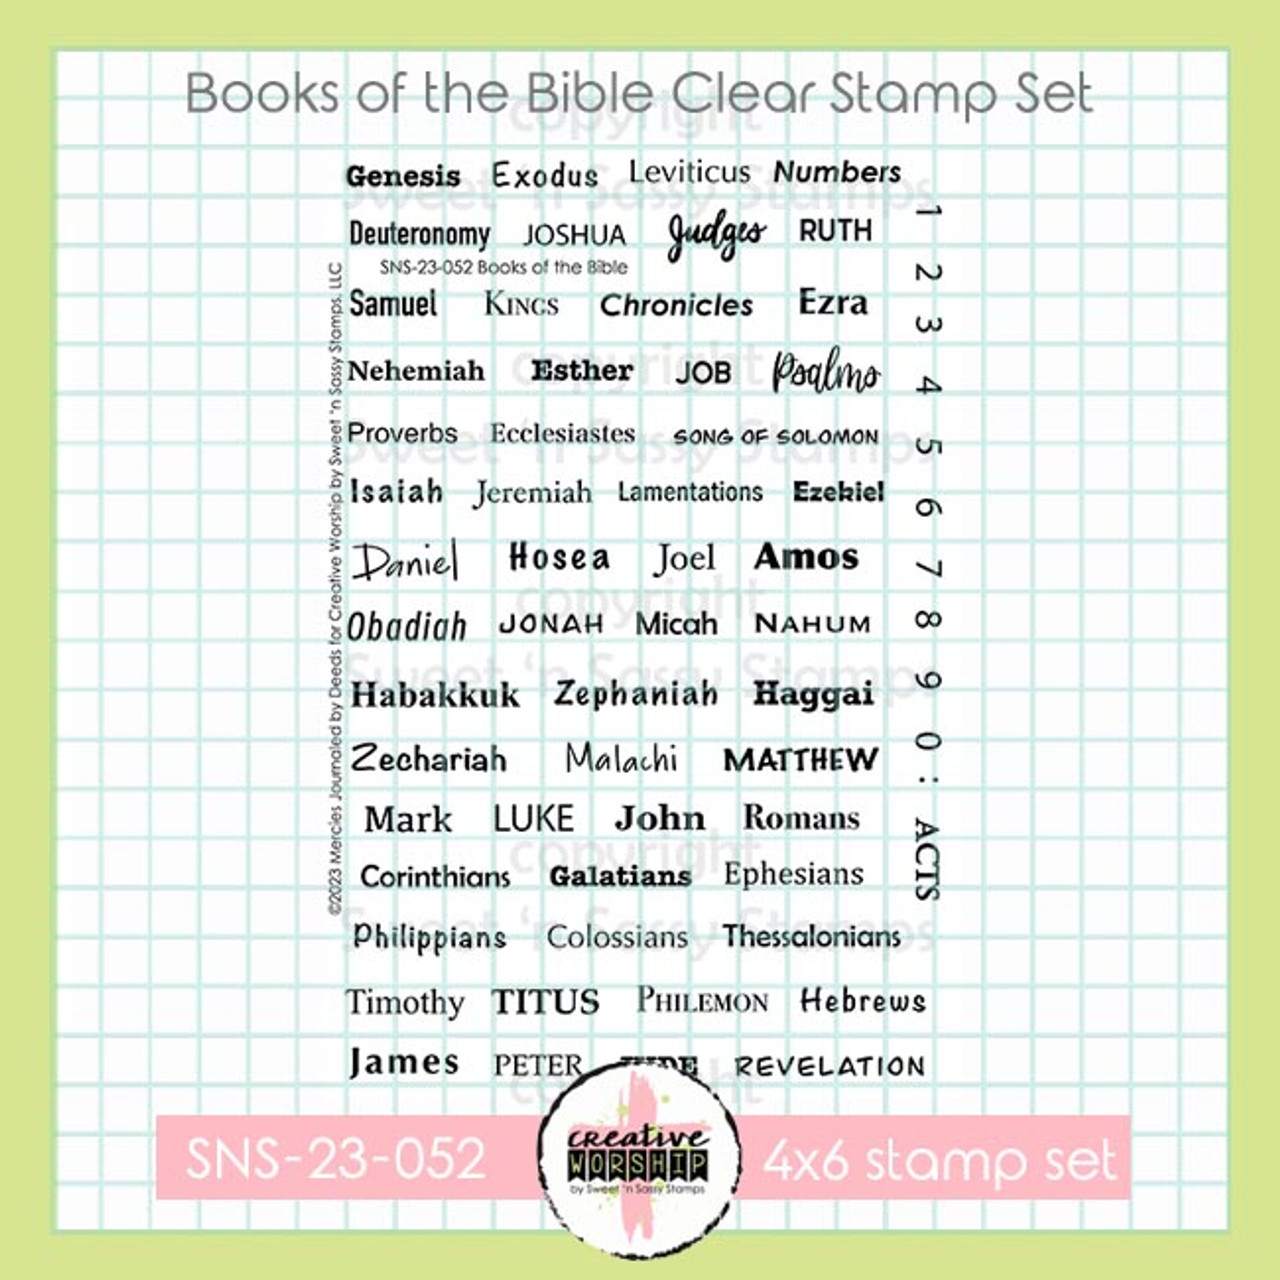 Books　Set　'n　Stamp　Creative　the　Sweet　Bible　Clear　Worship:　of　LLC　Sassy　Stamps,